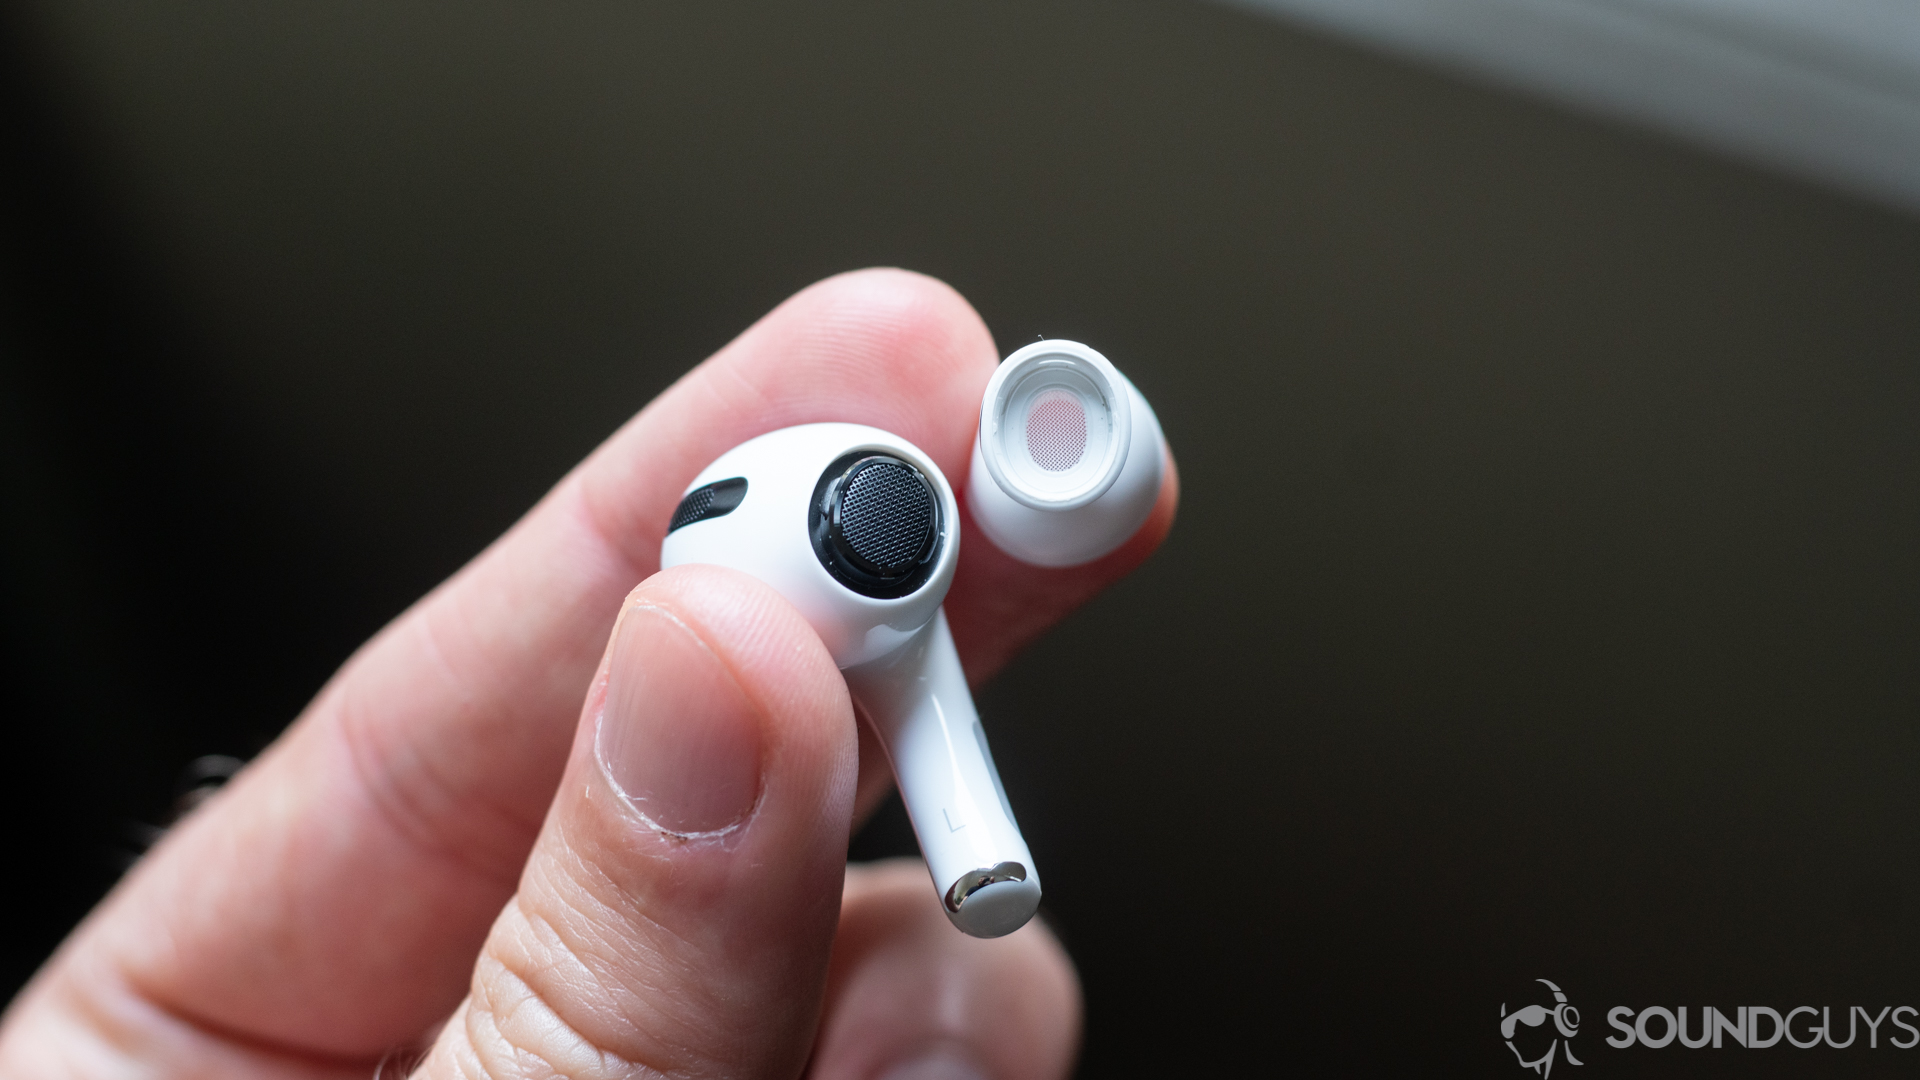 A picture of the Apple AirPods Pro silicone earbuds removed from the earbud and into the man's hand.